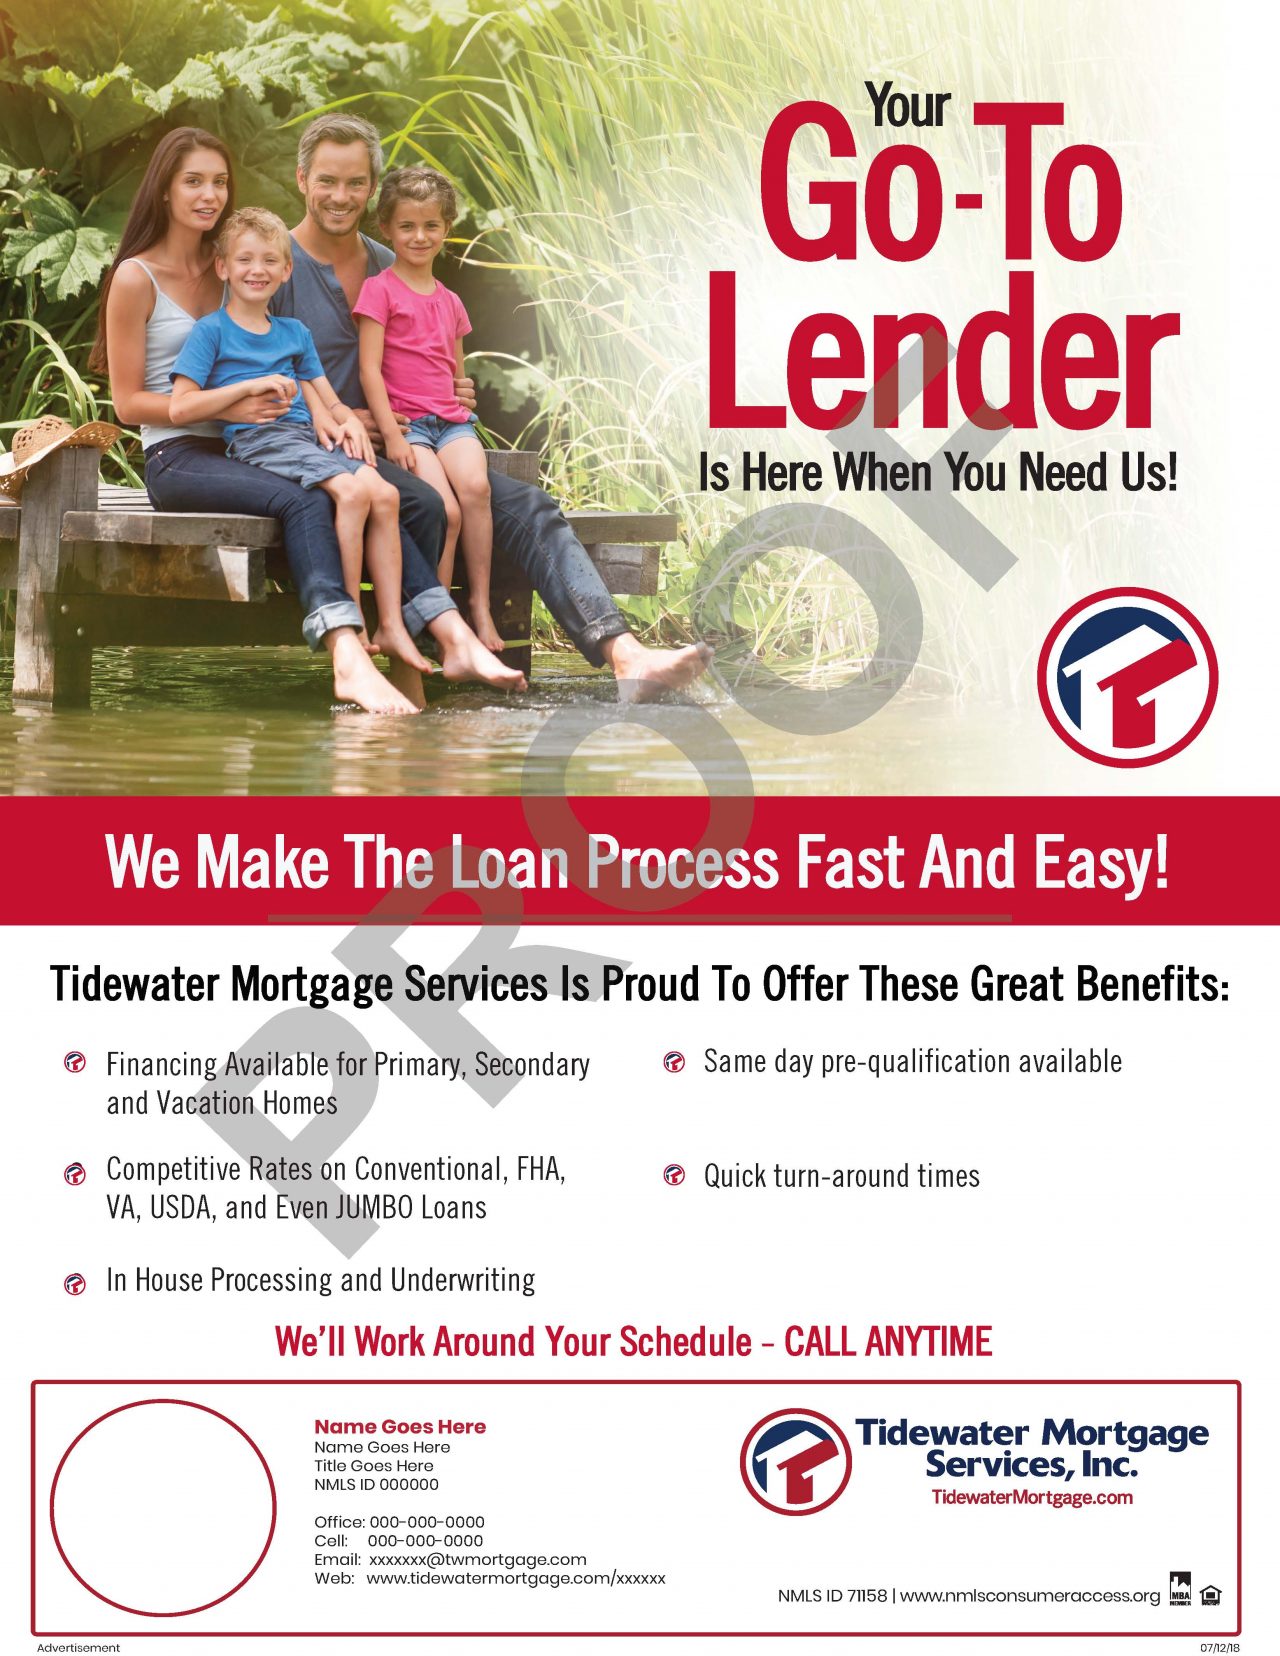 Go To Lender Lake 073018 Tidewater Mortgage Services Inc